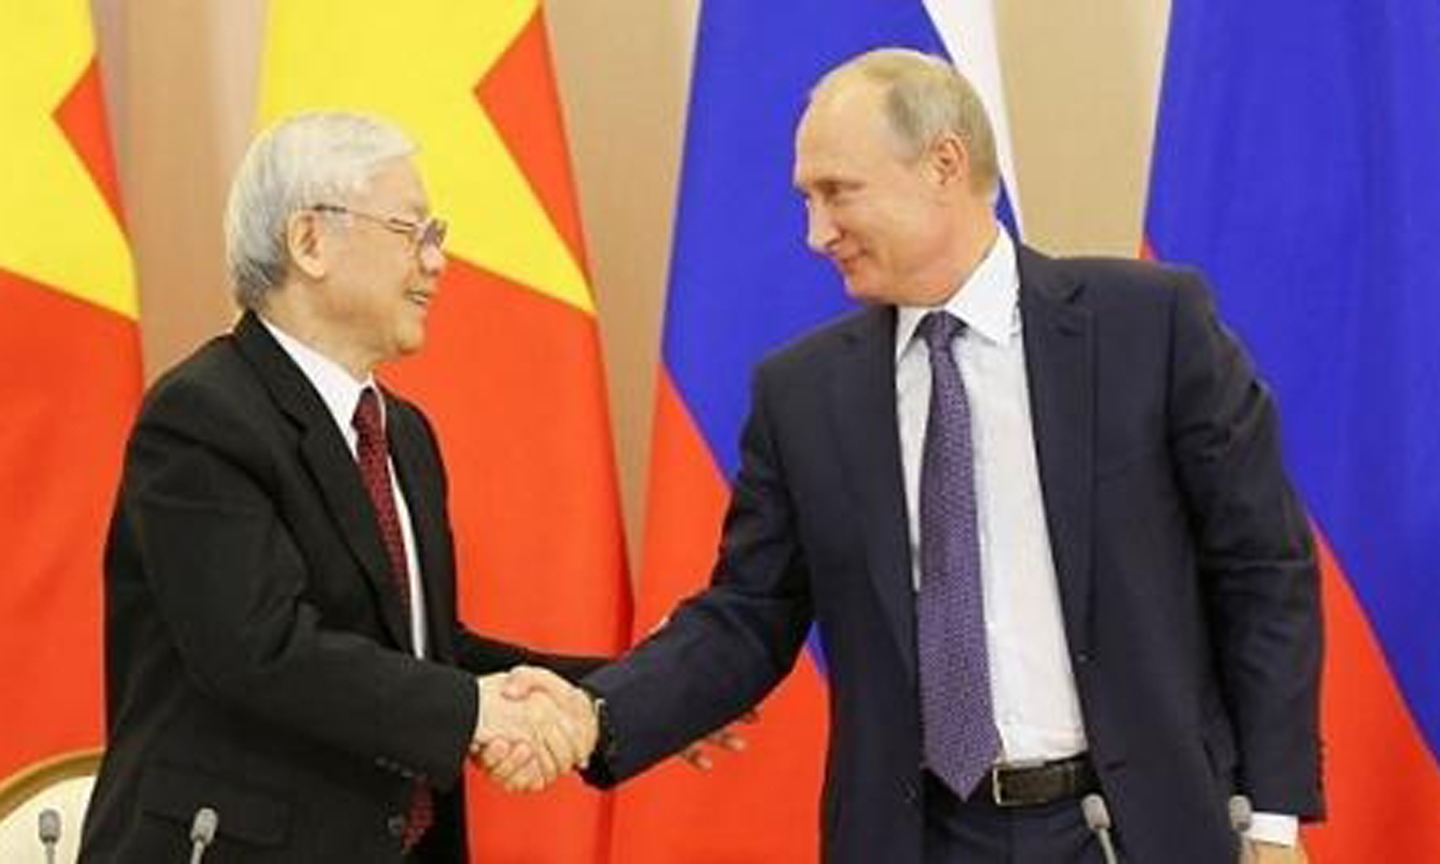 Party General Secretary and President Nguyen Phu Trong and President of the Russia Federation Vladimir Putin.